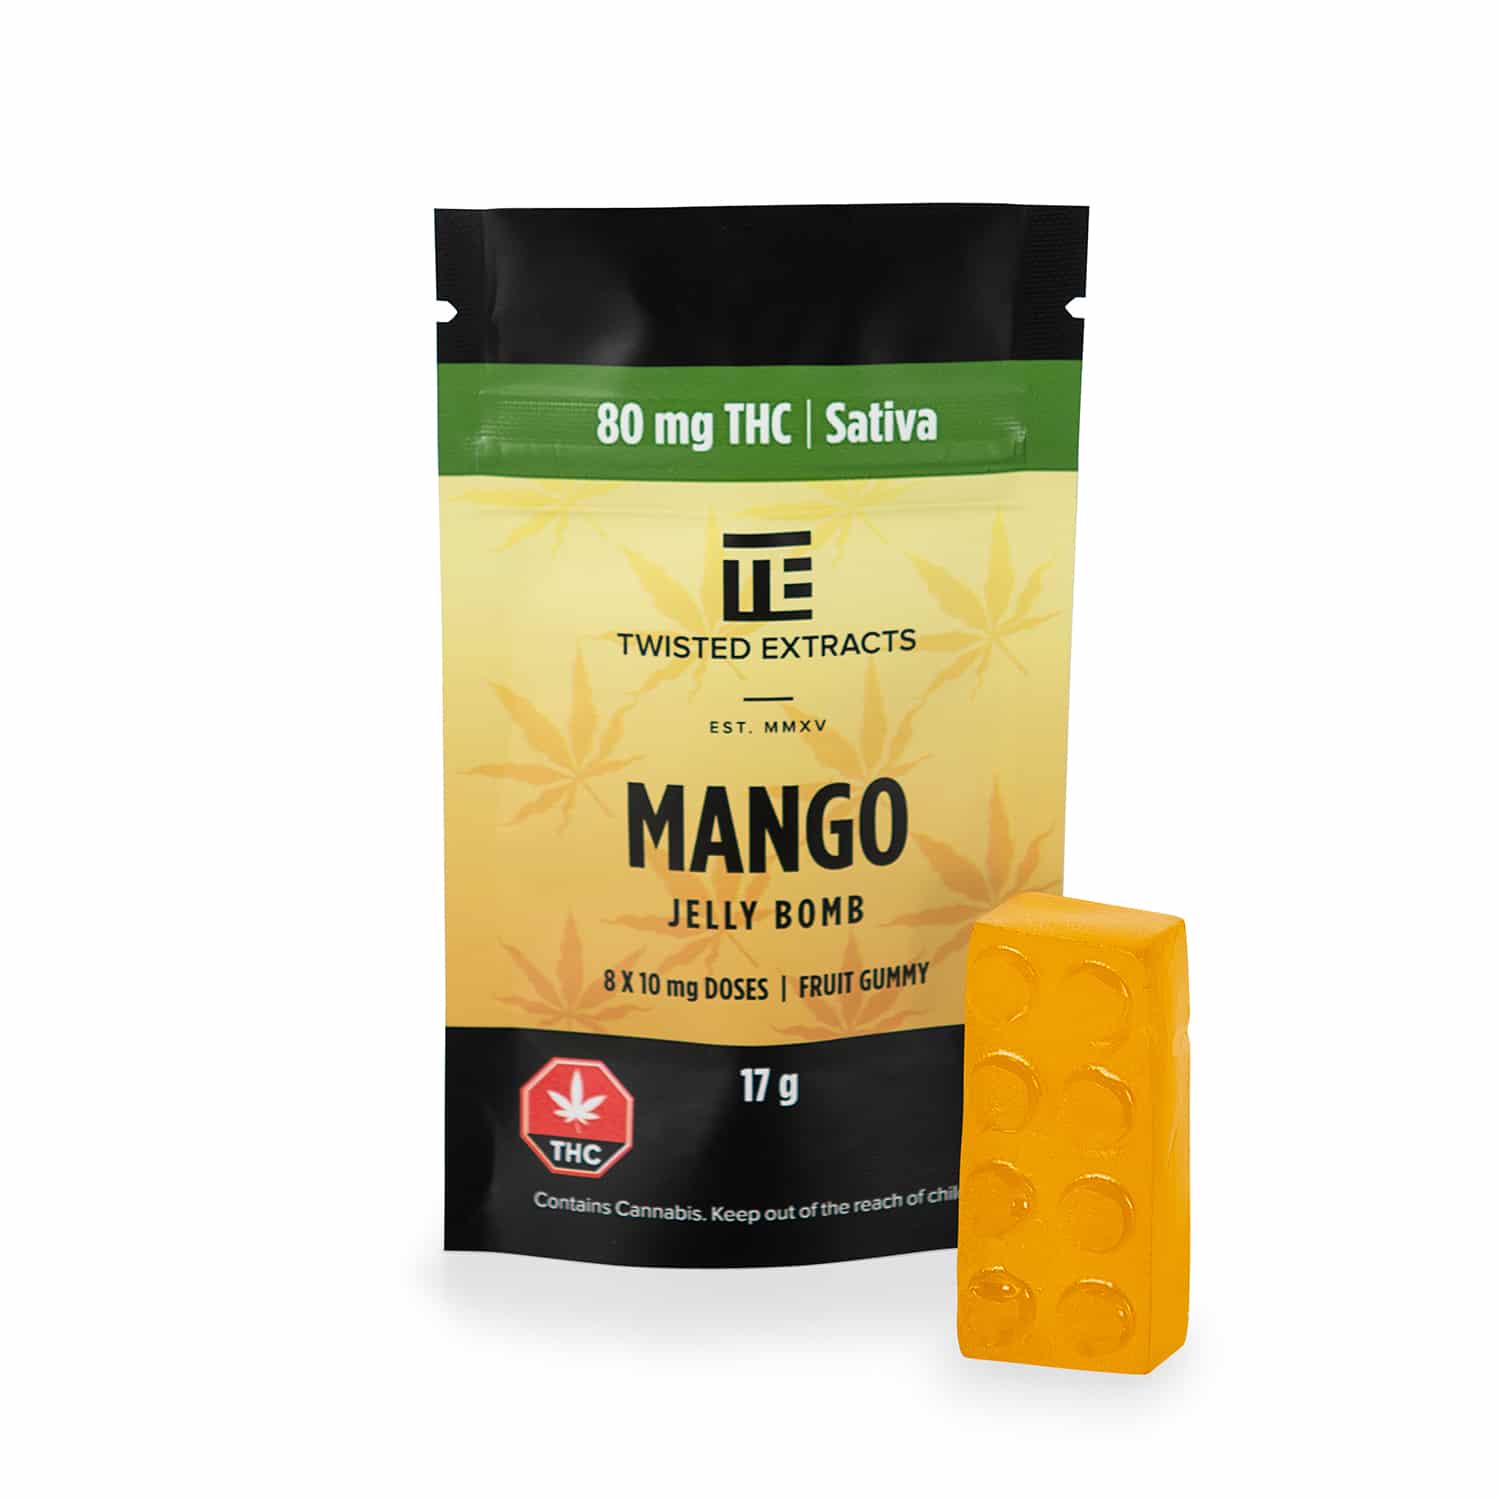 Mango Jelly Bomb by Twisted Extracts